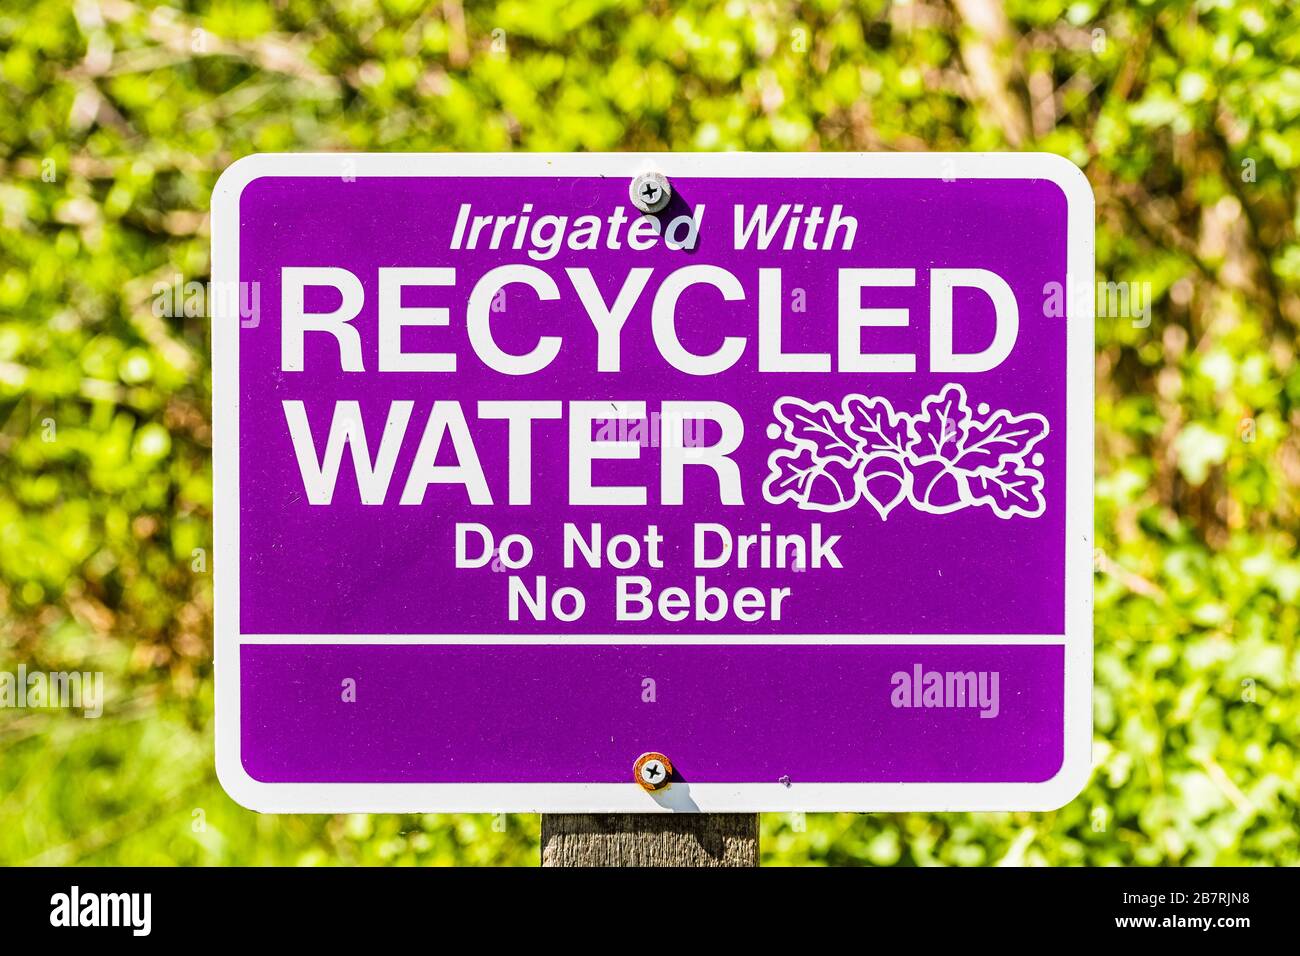 Close up of Irrigated with Recycled Water; Do Not Drink sign posted in a public park in Santa Clara, South San Francisco Bay Area, California Stock Photo